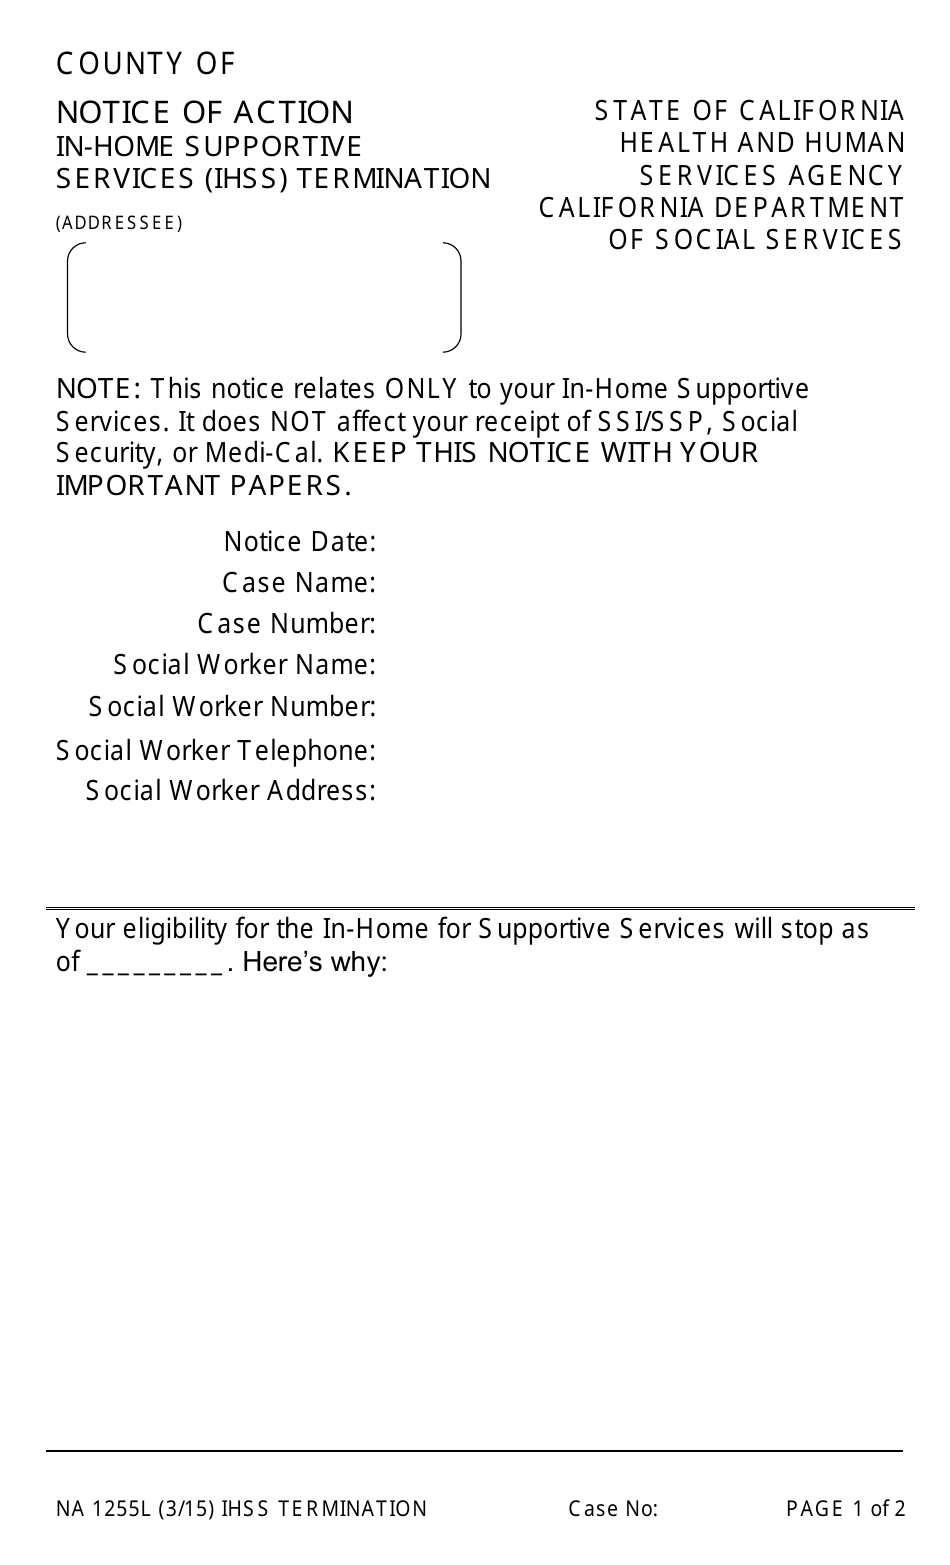 Form NA1255L Notice of Action in-Home Supportive Services (Ihss) Termination - California, Page 1